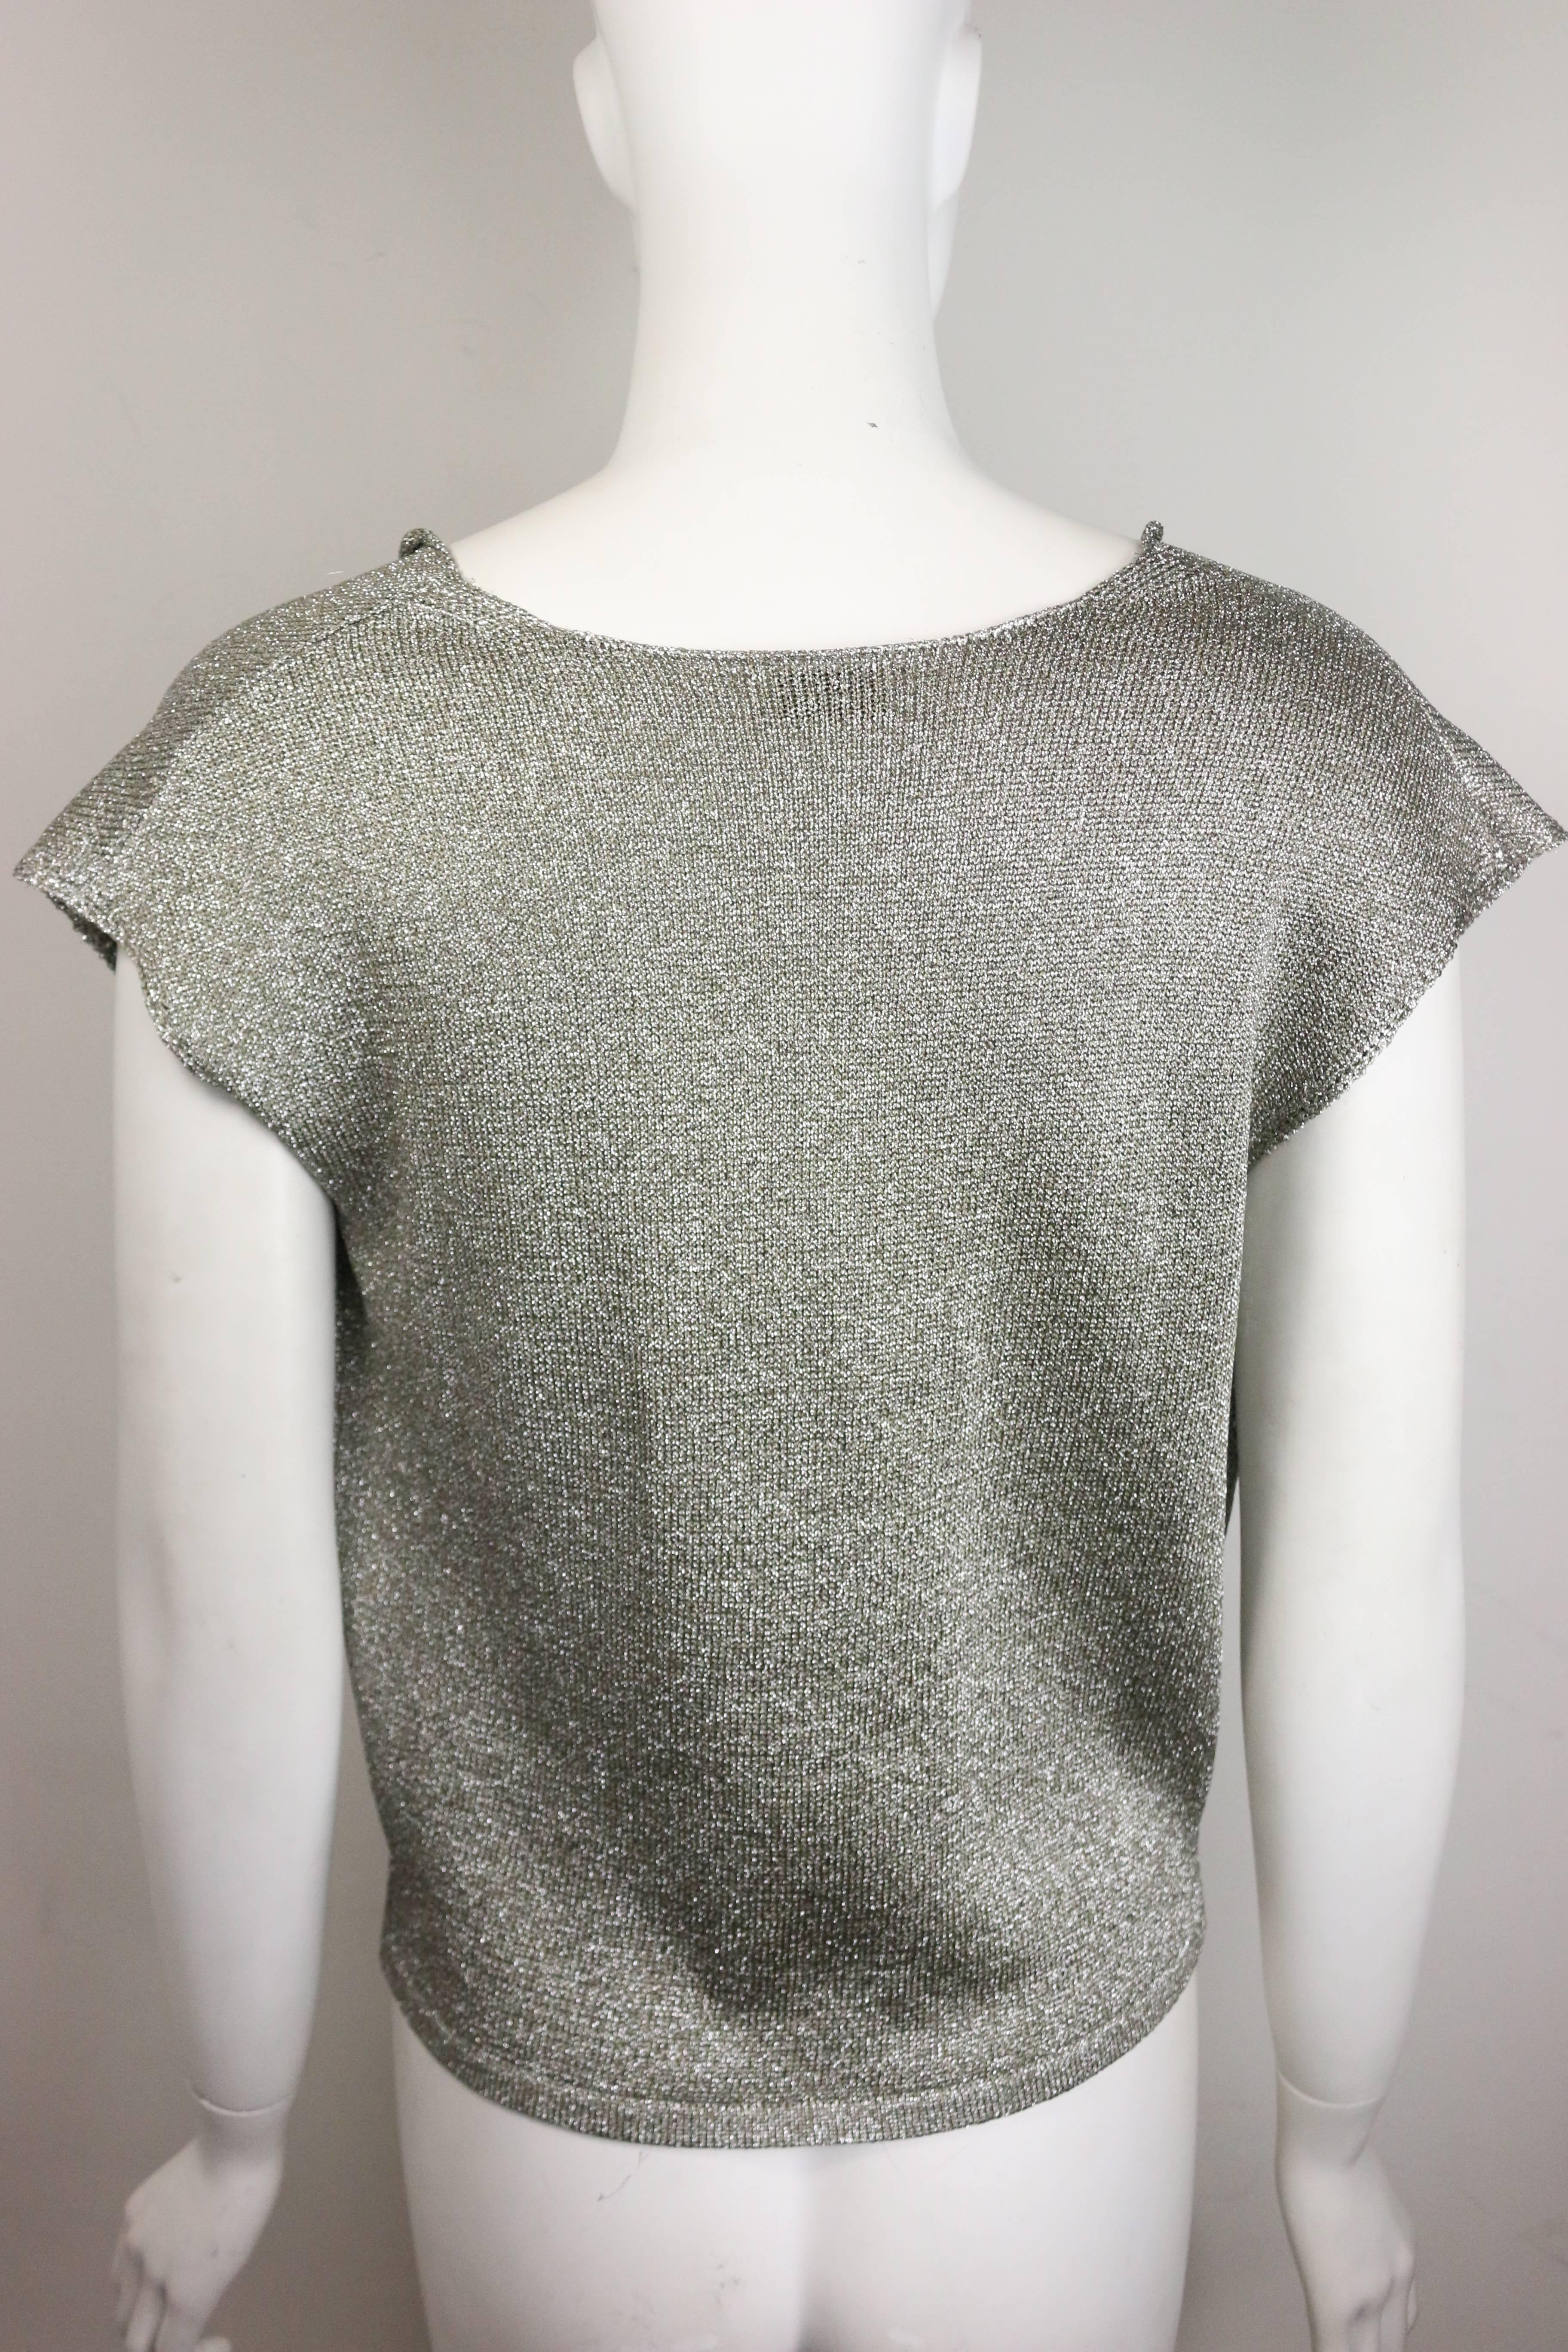 - Saint Laurent by Hedi Slimane silver metallic round neck top. This rock and roll and chic top is the signature of Hedi Slimane Saint Laurent era! 

- Made in Italy. 

- Size L. 

- 60% Rayon, 40% Polyester. 

